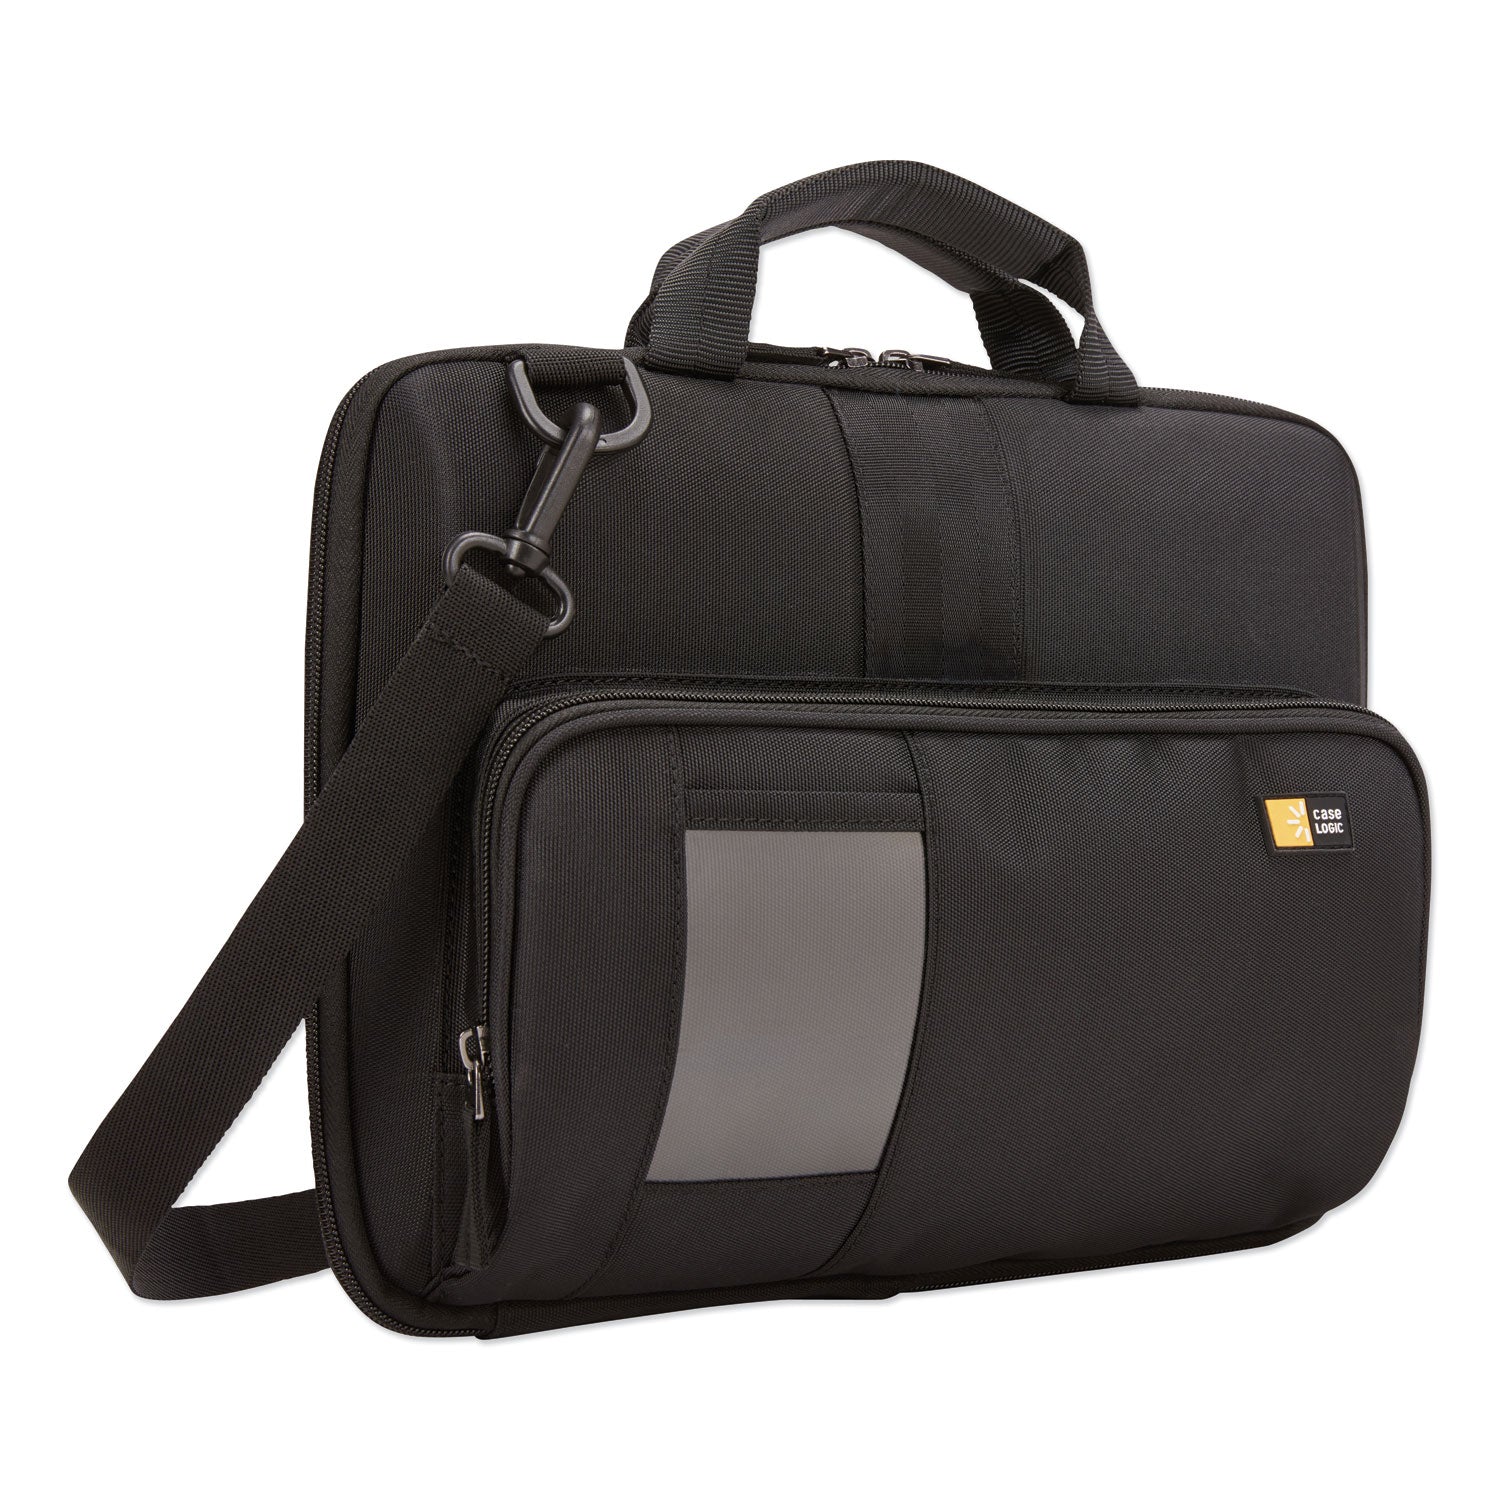 guardian-work-in-case-with-pocket-fits-devices-up-to-133-polyester-13-x-24-x-98-black_clg3203771 - 1